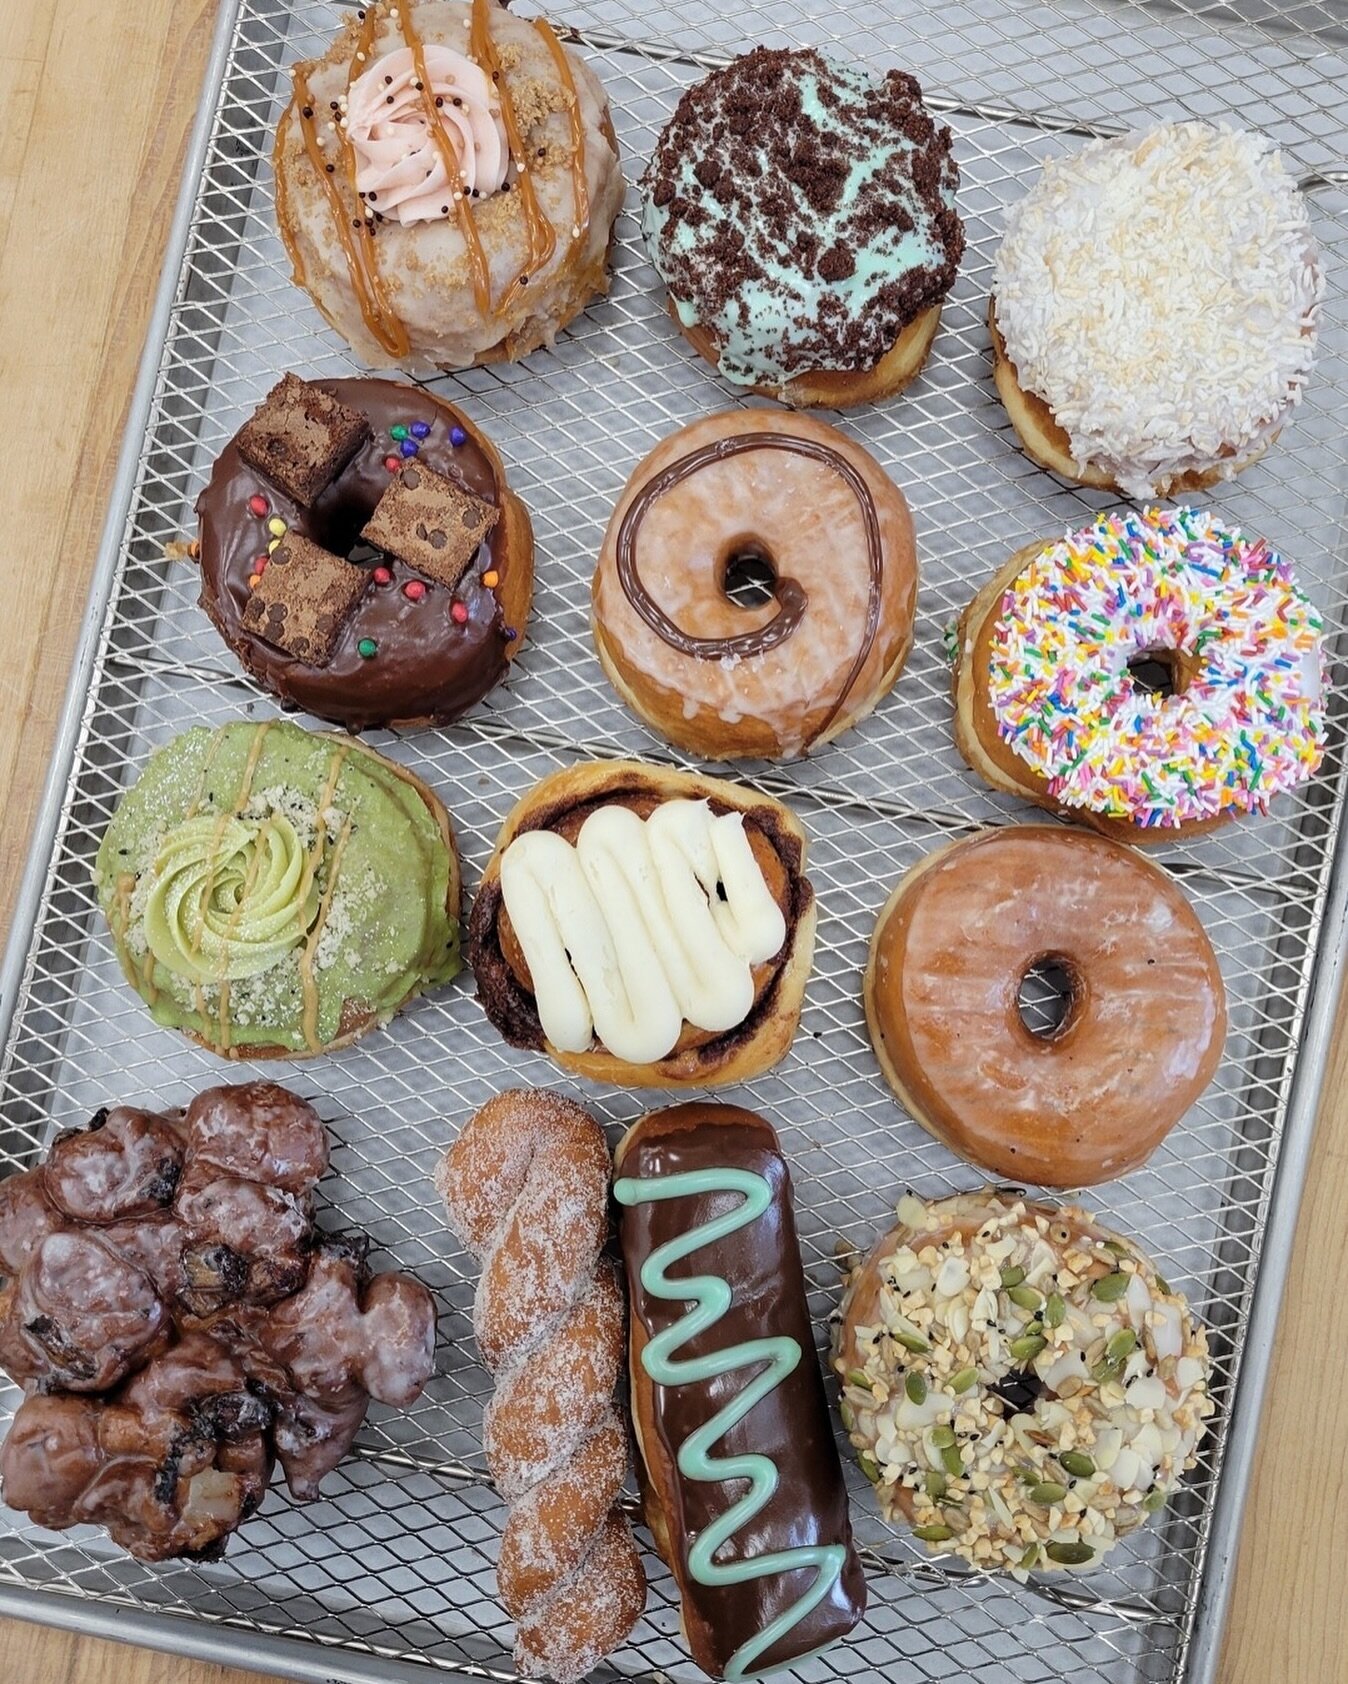 @doughnutparty is the newest DELICIOUS spot for doughnuts your kids (and you) will keep going back to. An Edmonton staple, this popular doughnut co. has opened its first location in Calgary at 1125 9 Ave. S.E. You&rsquo;ve got to try these thicc doug